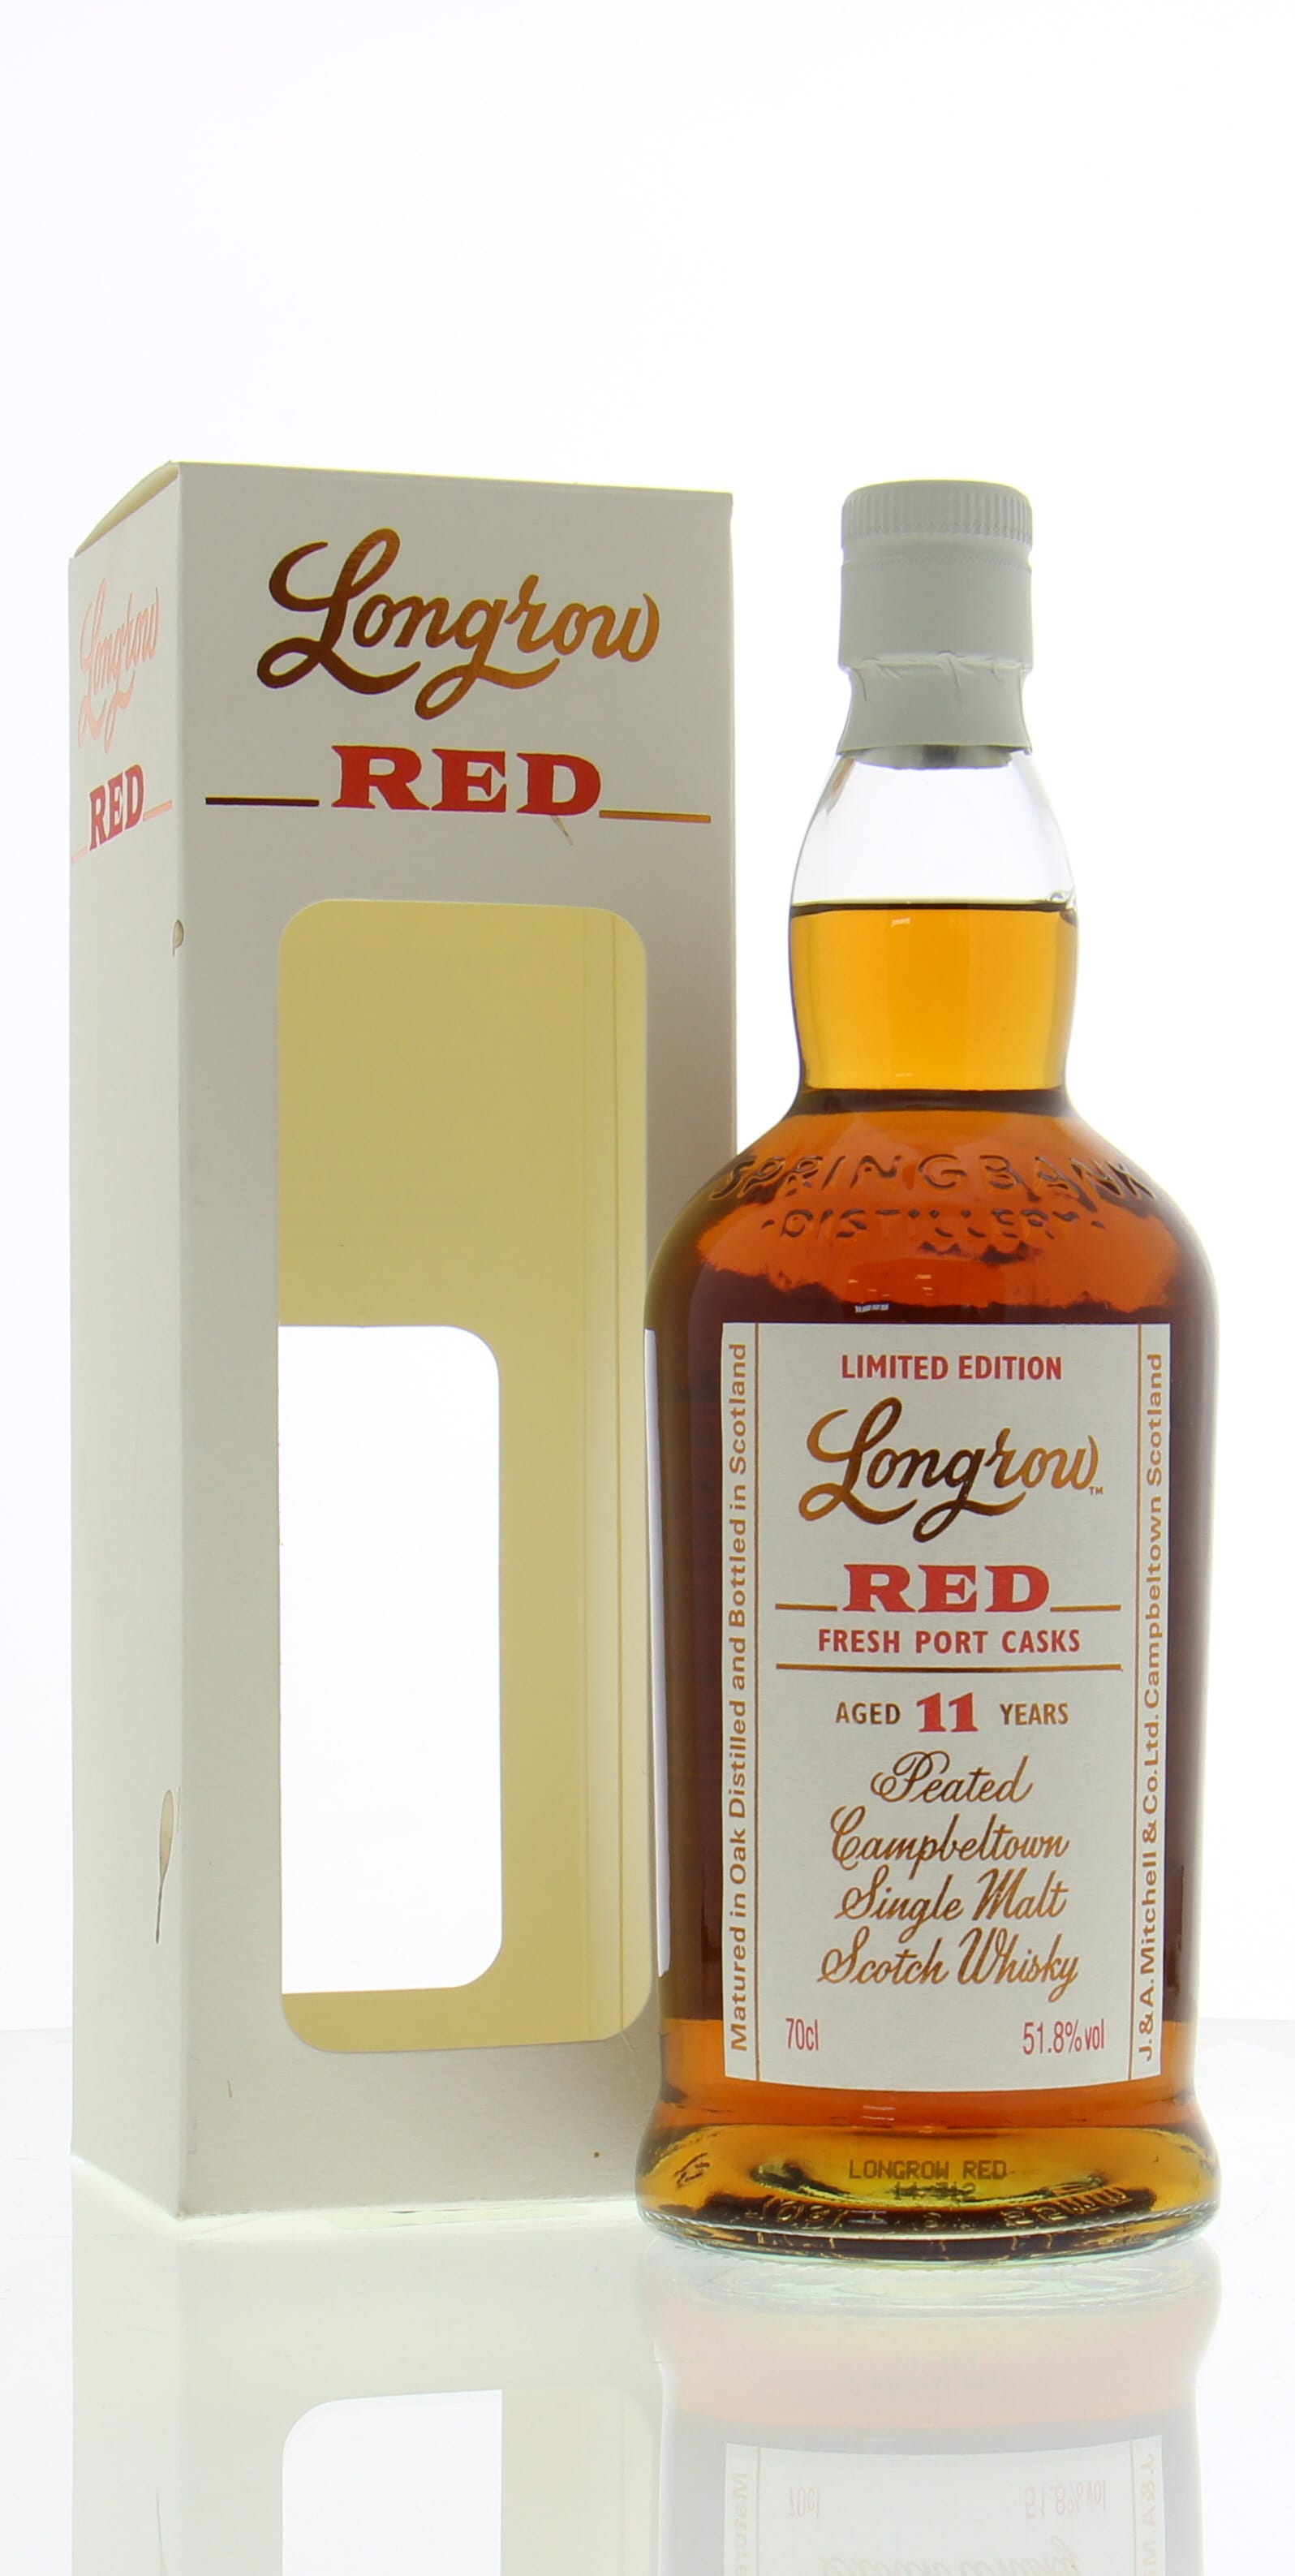 Longrow - 11 Years Old Red Fresh Port Cask 51.8% NV In Original Container